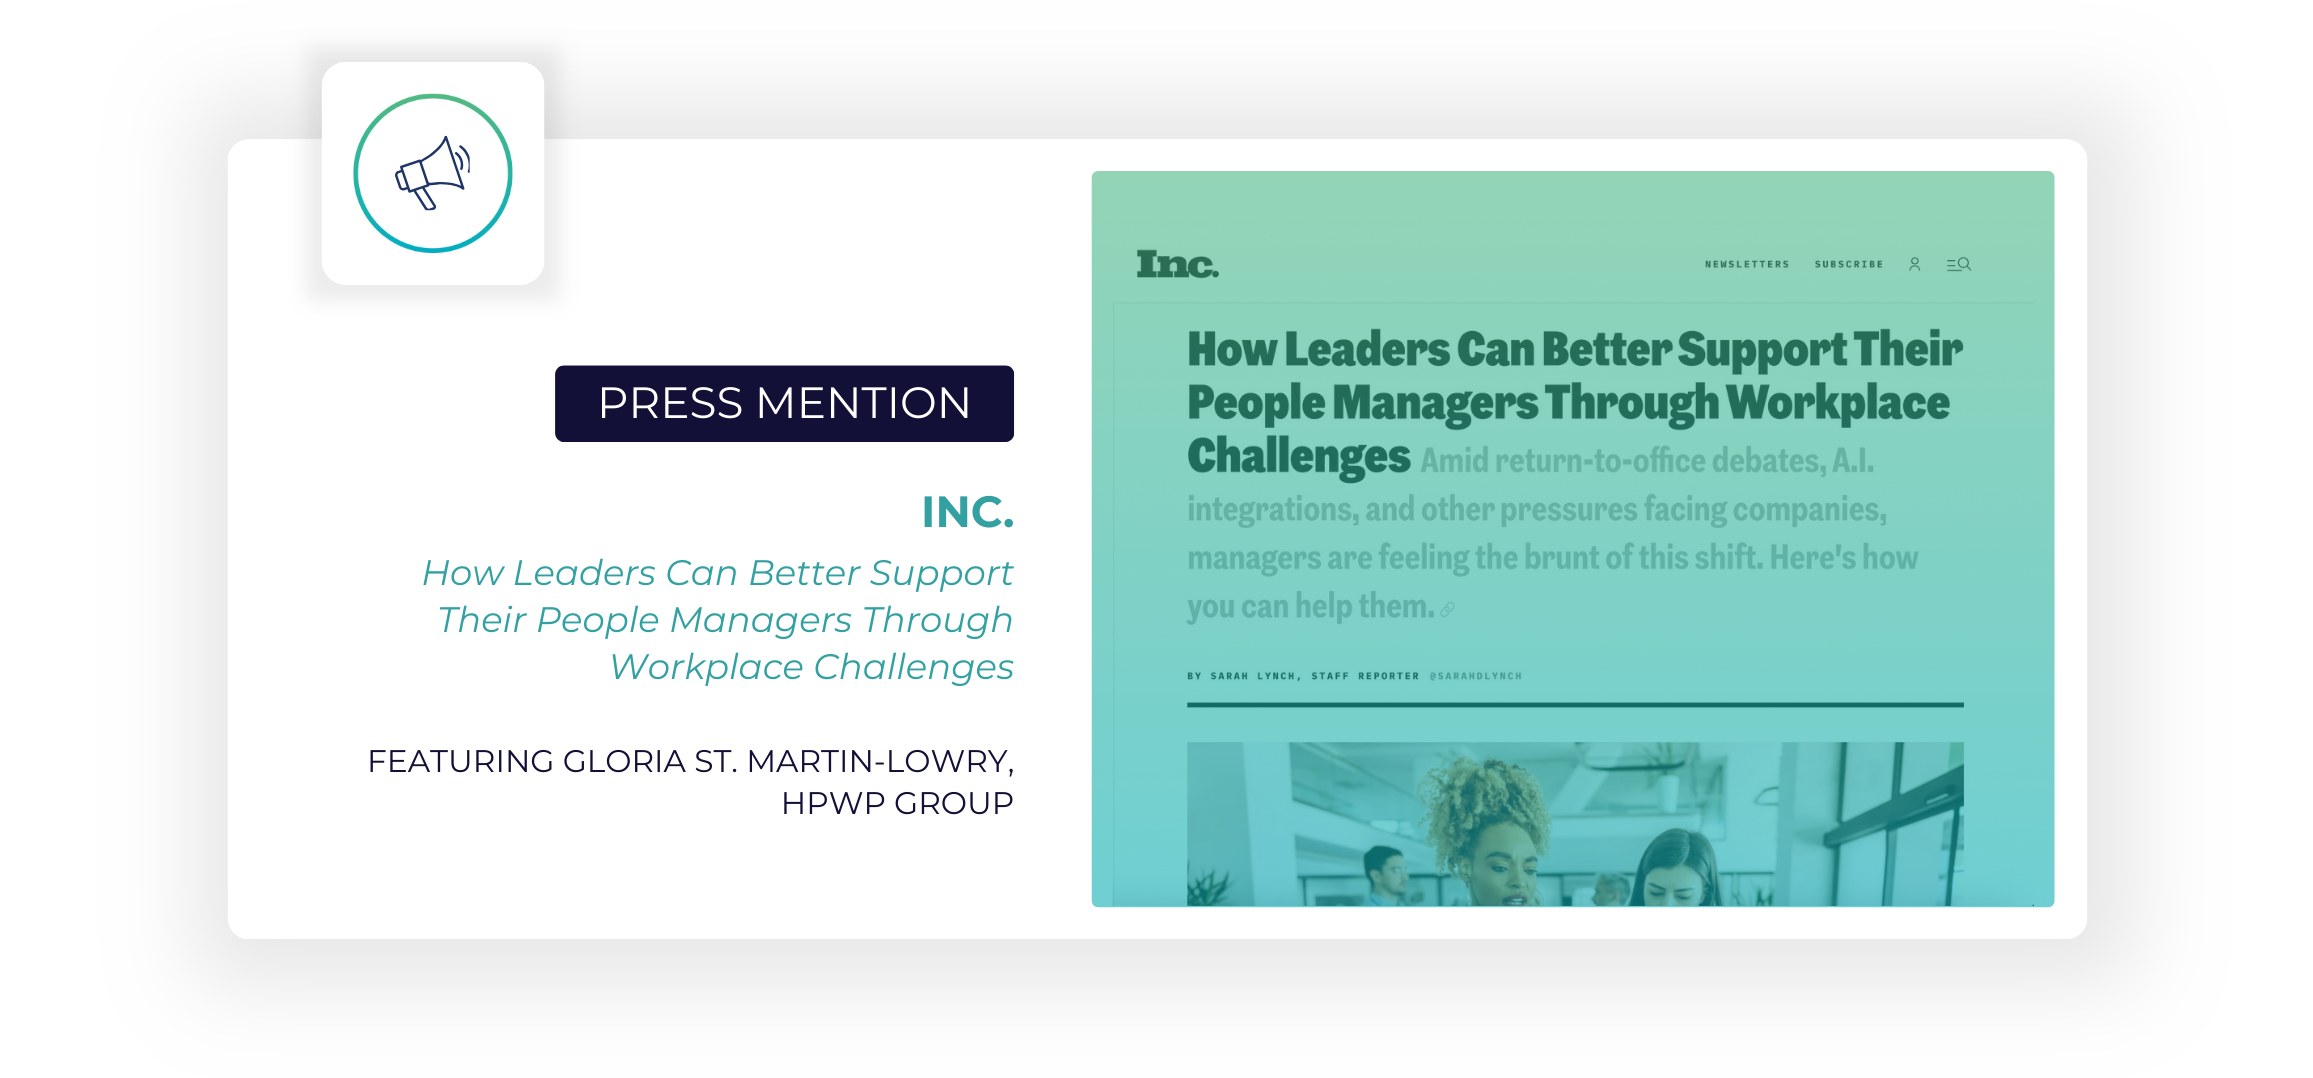 Press mention in Inc. featuring Gloria St. Martin-Lowry of HPWP Group: How Leaders Can Better Support Their People Managers Through Workplace Challenges